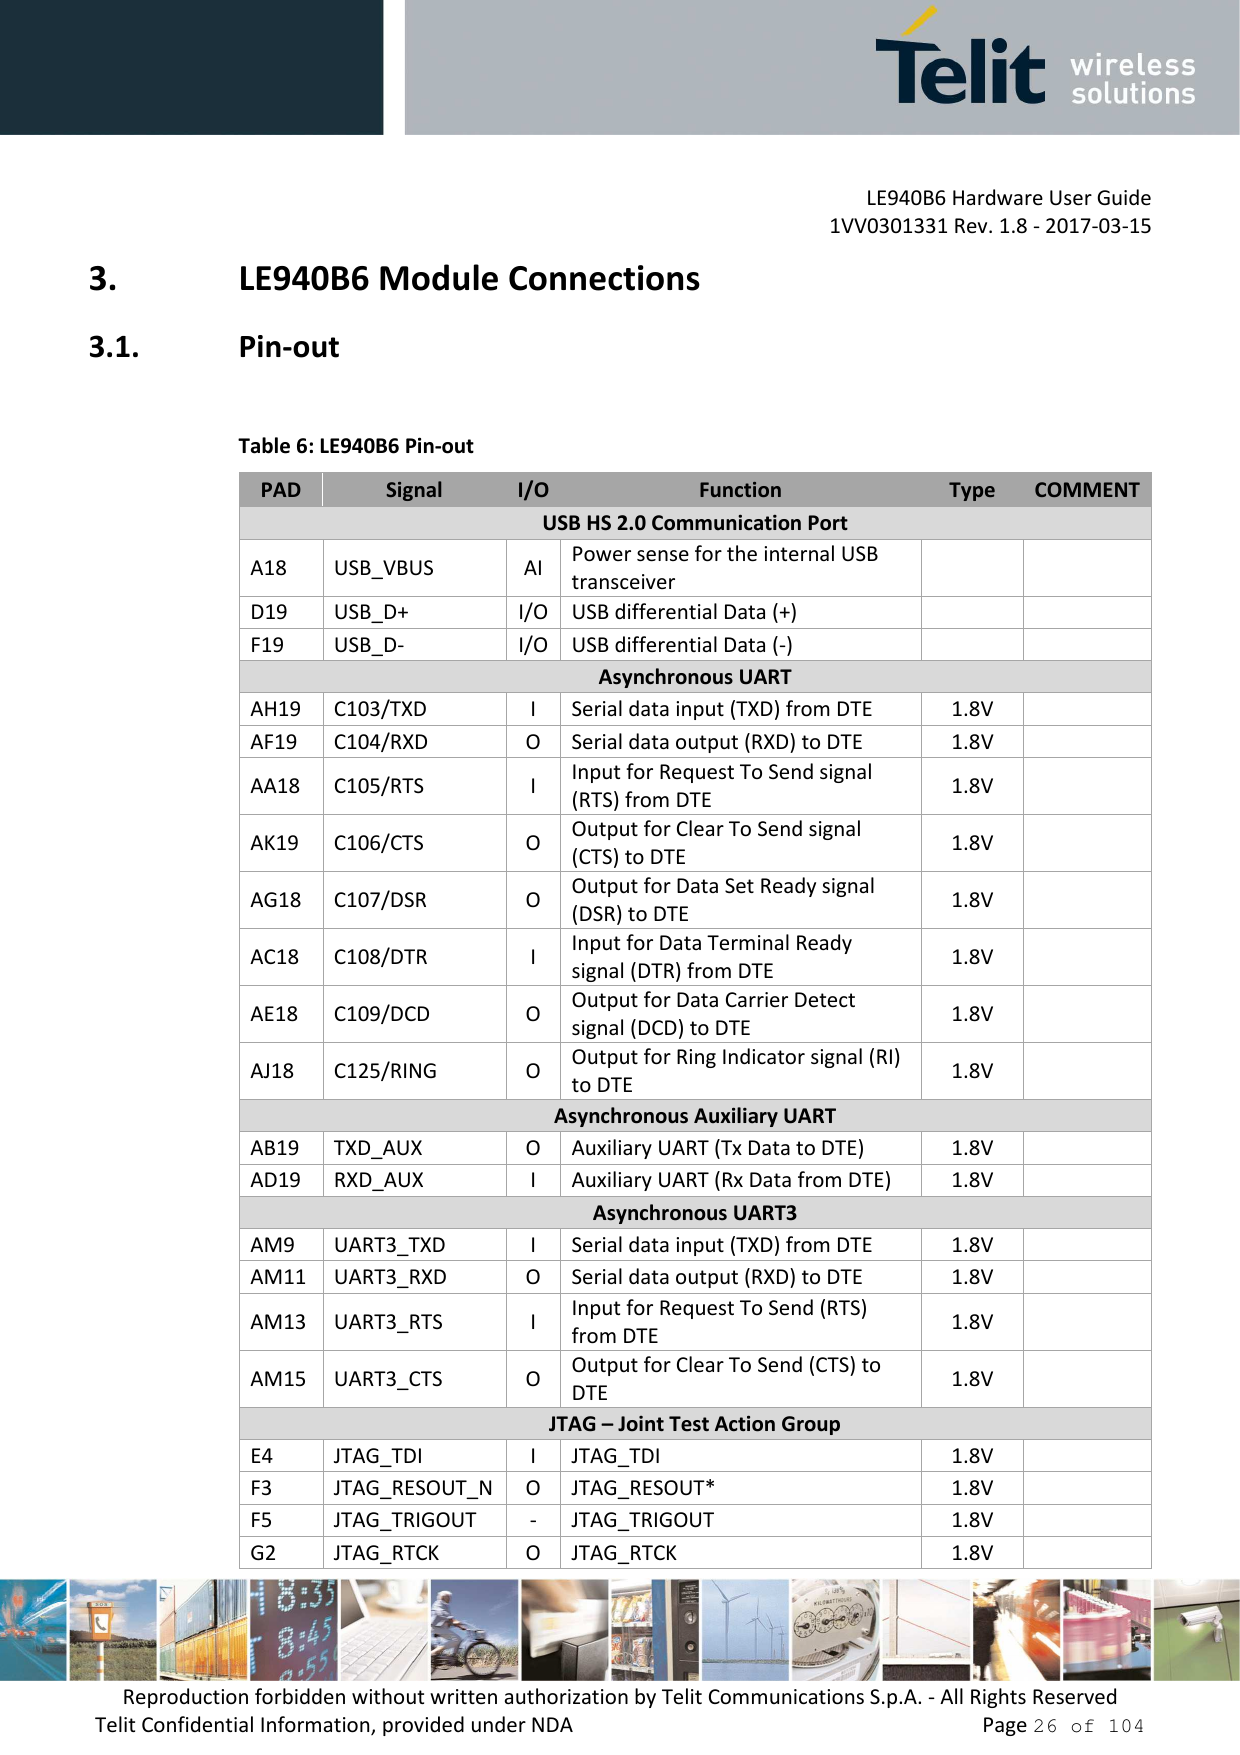         LE940B6 Hardware User Guide     1VV0301331 Rev. 1.8 - 2017-03-15 Reproduction forbidden without written authorization by Telit Communications S.p.A. - All Rights Reserved Telit Confidential Information, provided under NDA                 Page 26 of 104 3. LE940B6 Module Connections 3.1. Pin-out  Table 6: LE940B6 Pin-out PAD  Signal  I/O Function  Type  COMMENT USB HS 2.0 Communication Port A18  USB_VBUS  AI Power sense for the internal USB transceiver       D19  USB_D+  I/O USB differential Data (+)       F19  USB_D-  I/O USB differential Data (-)       Asynchronous UART AH19  C103/TXD  I  Serial data input (TXD) from DTE  1.8V    AF19  C104/RXD  O  Serial data output (RXD) to DTE  1.8V    AA18  C105/RTS  I Input for Request To Send signal (RTS) from DTE  1.8V    AK19  C106/CTS  O Output for Clear To Send signal (CTS) to DTE  1.8V    AG18  C107/DSR  O Output for Data Set Ready signal (DSR) to DTE  1.8V    AC18  C108/DTR  I Input for Data Terminal Ready signal (DTR) from DTE  1.8V    AE18  C109/DCD  O Output for Data Carrier Detect signal (DCD) to DTE  1.8V    AJ18  C125/RING  O Output for Ring Indicator signal (RI) to DTE  1.8V    Asynchronous Auxiliary UART AB19  TXD_AUX  O  Auxiliary UART (Tx Data to DTE)  1.8V    AD19  RXD_AUX  I  Auxiliary UART (Rx Data from DTE)  1.8V    Asynchronous UART3  AM9  UART3_TXD  I  Serial data input (TXD) from DTE  1.8V    AM11 UART3_RXD  O  Serial data output (RXD) to DTE  1.8V    AM13 UART3_RTS  I Input for Request To Send (RTS) from DTE  1.8V    AM15 UART3_CTS  O Output for Clear To Send (CTS) to DTE  1.8V    JTAG – Joint Test Action Group E4  JTAG_TDI  I  JTAG_TDI  1.8V    F3  JTAG_RESOUT_N O  JTAG_RESOUT*  1.8V    F5  JTAG_TRIGOUT  -  JTAG_TRIGOUT  1.8V    G2  JTAG_RTCK  O  JTAG_RTCK  1.8V    